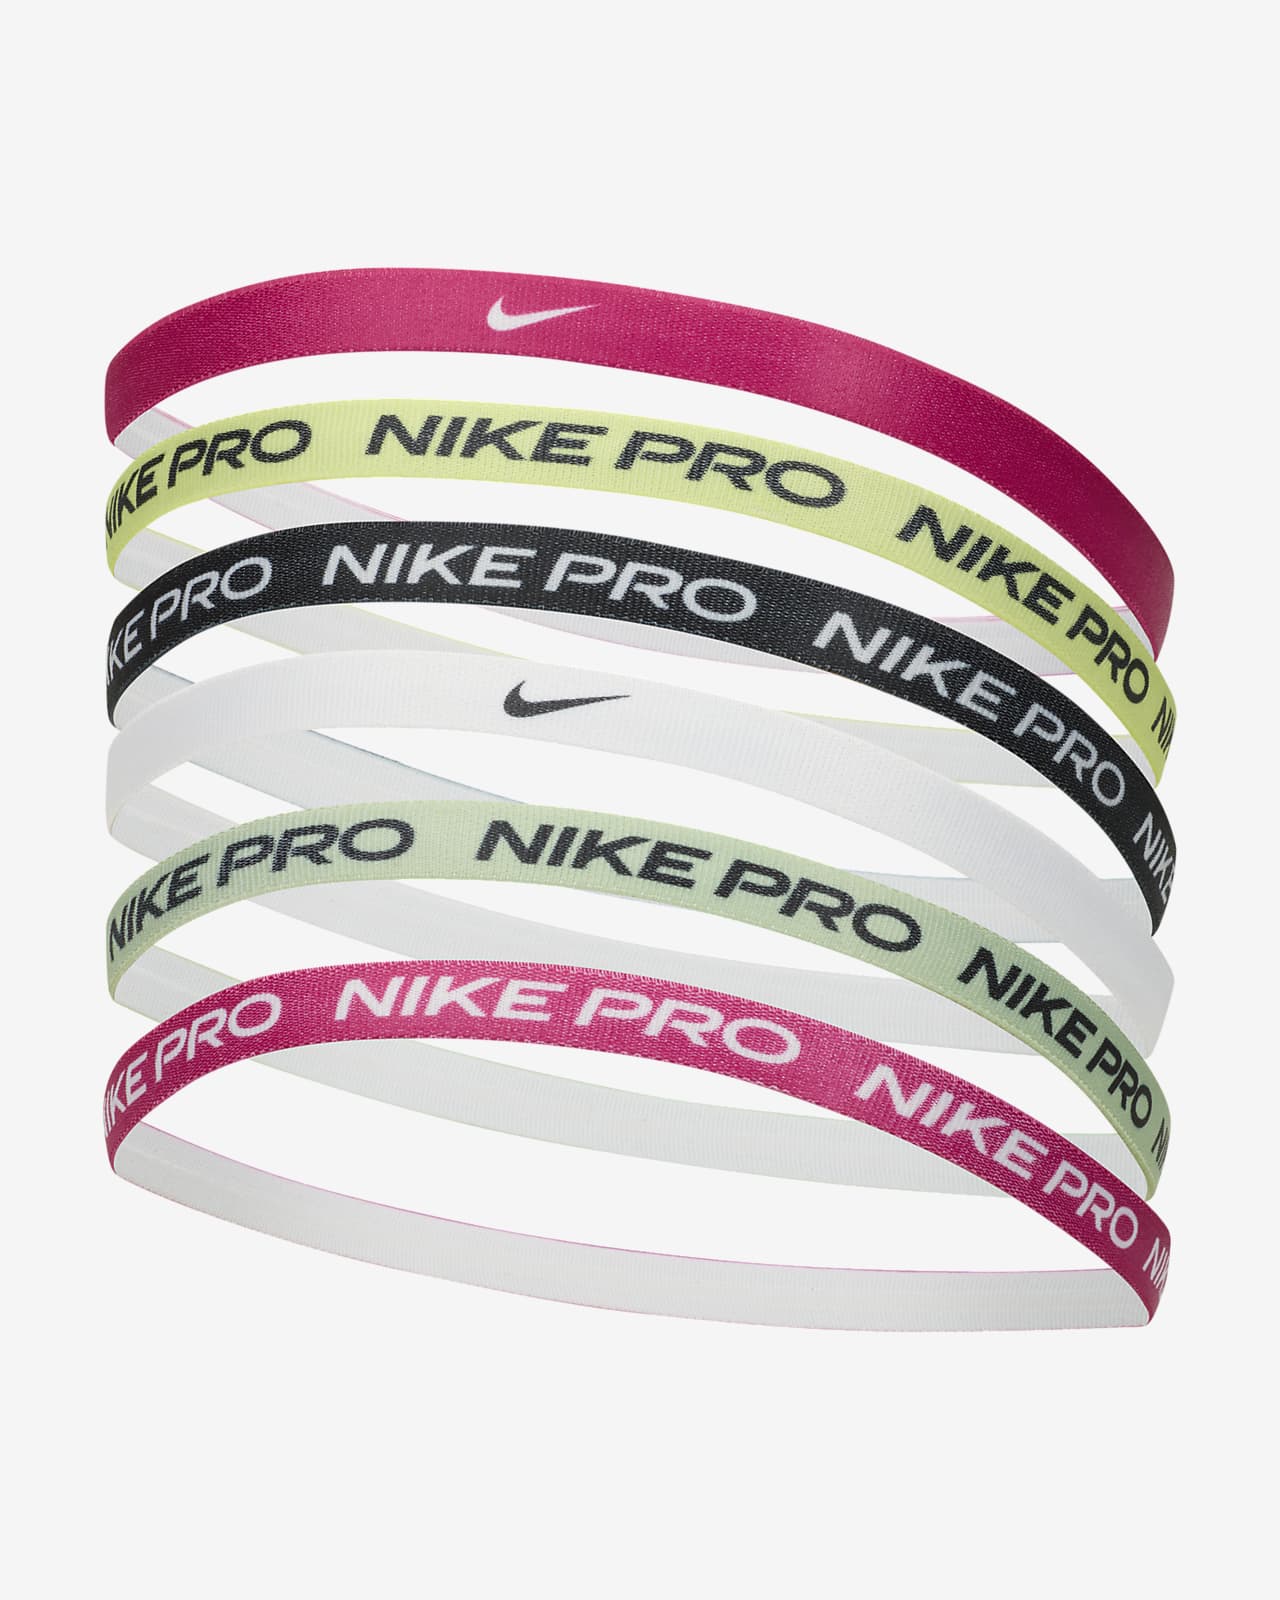 Pannband Nike med tryck (6-pack)